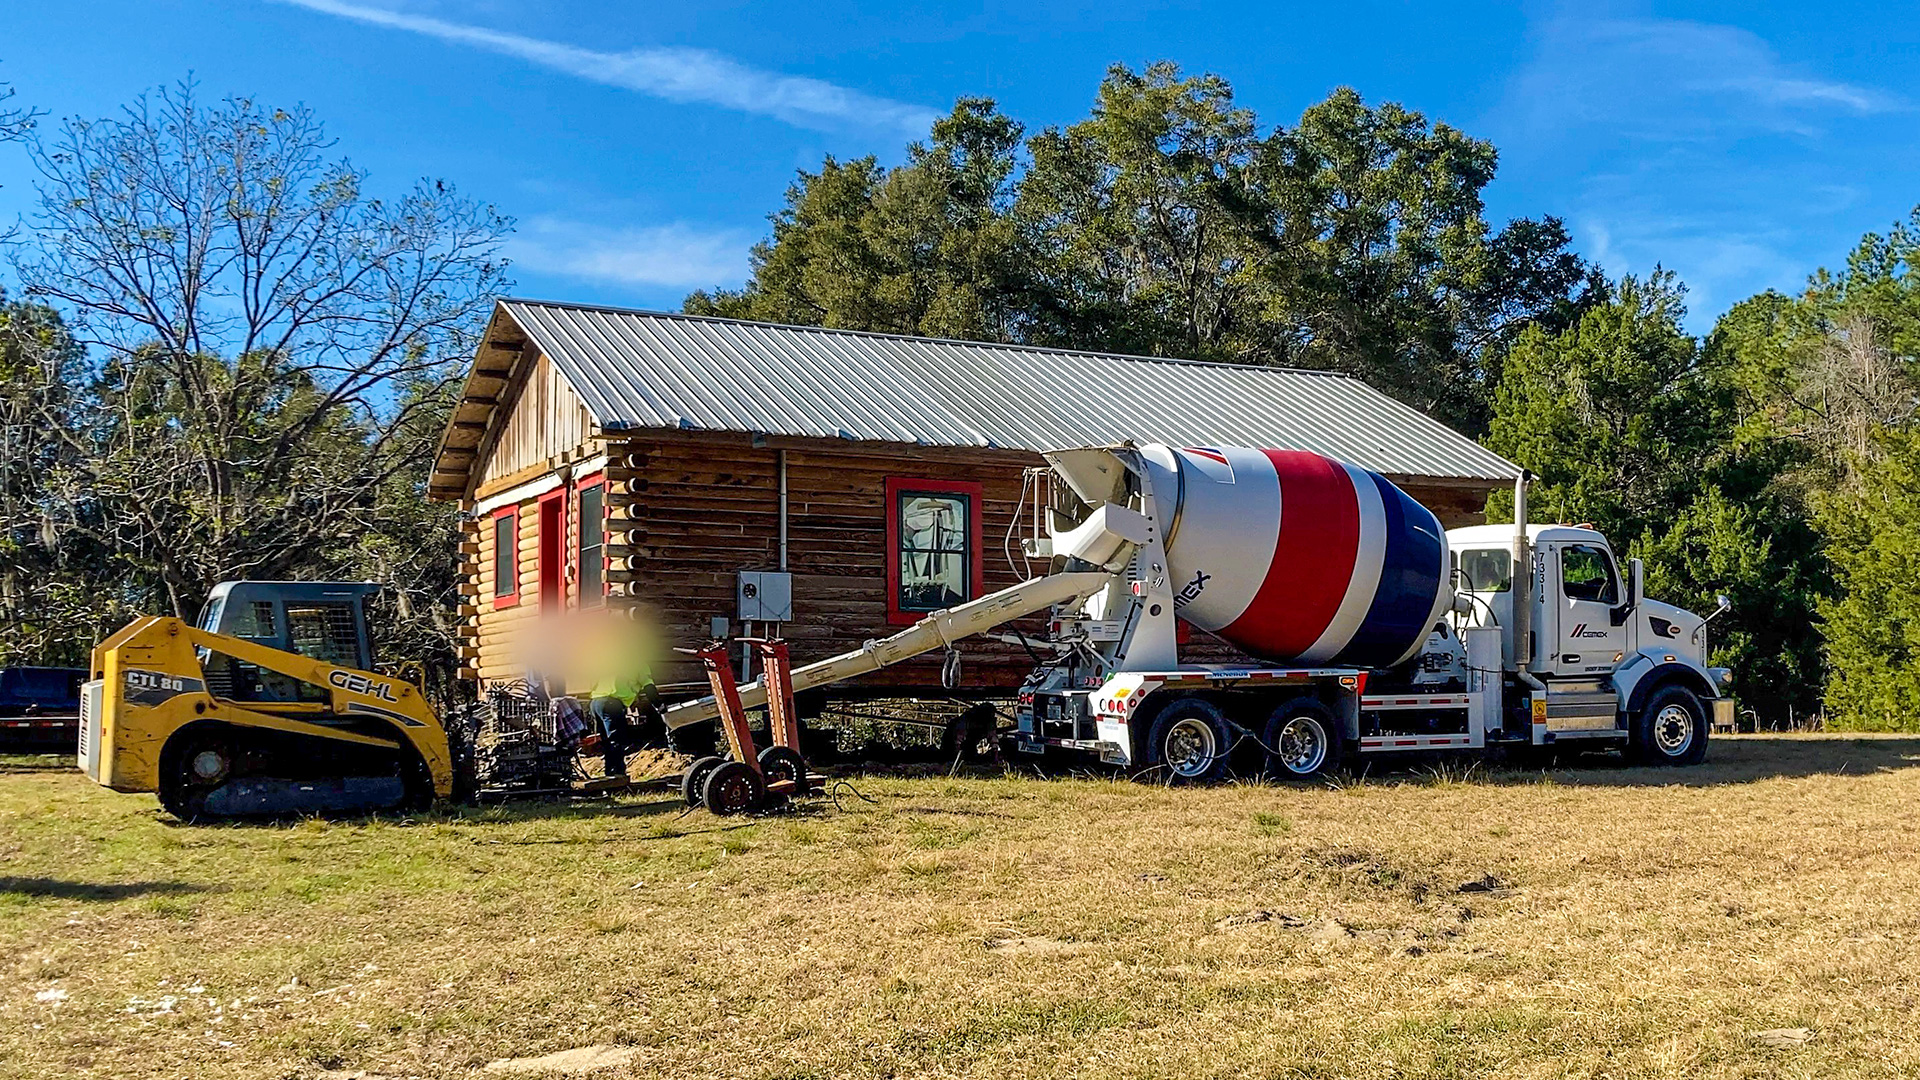 The Cement Truck Is Here: My Log Cabin Is Finally Getting A Foundation